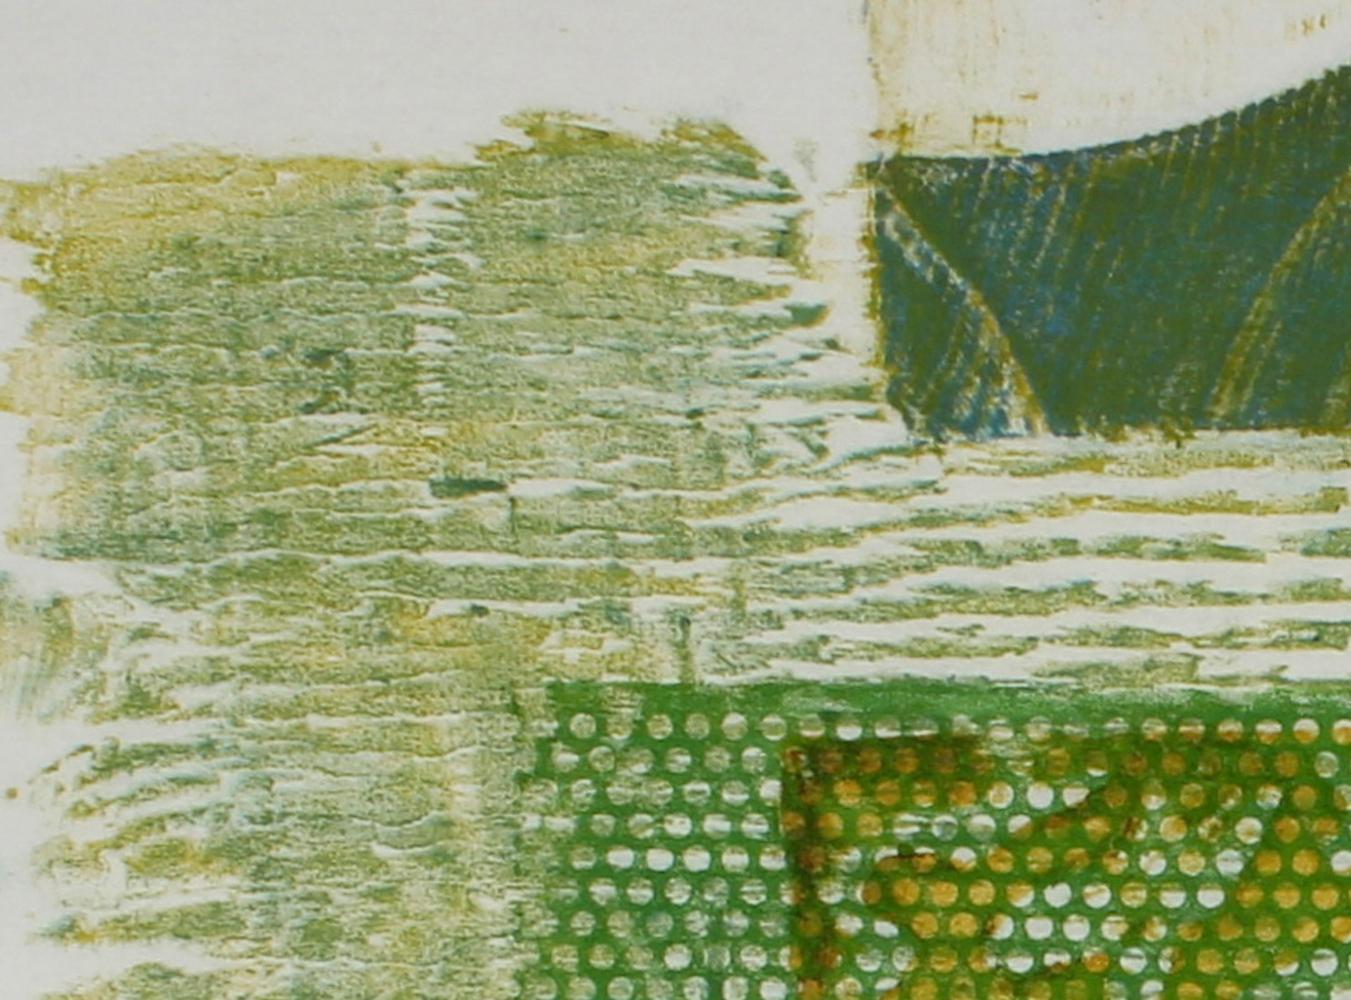 Organic Textured Abstract in Green, Mixed Media Woodcut Print - American Modern Mixed Media Art by Seymour Tubis